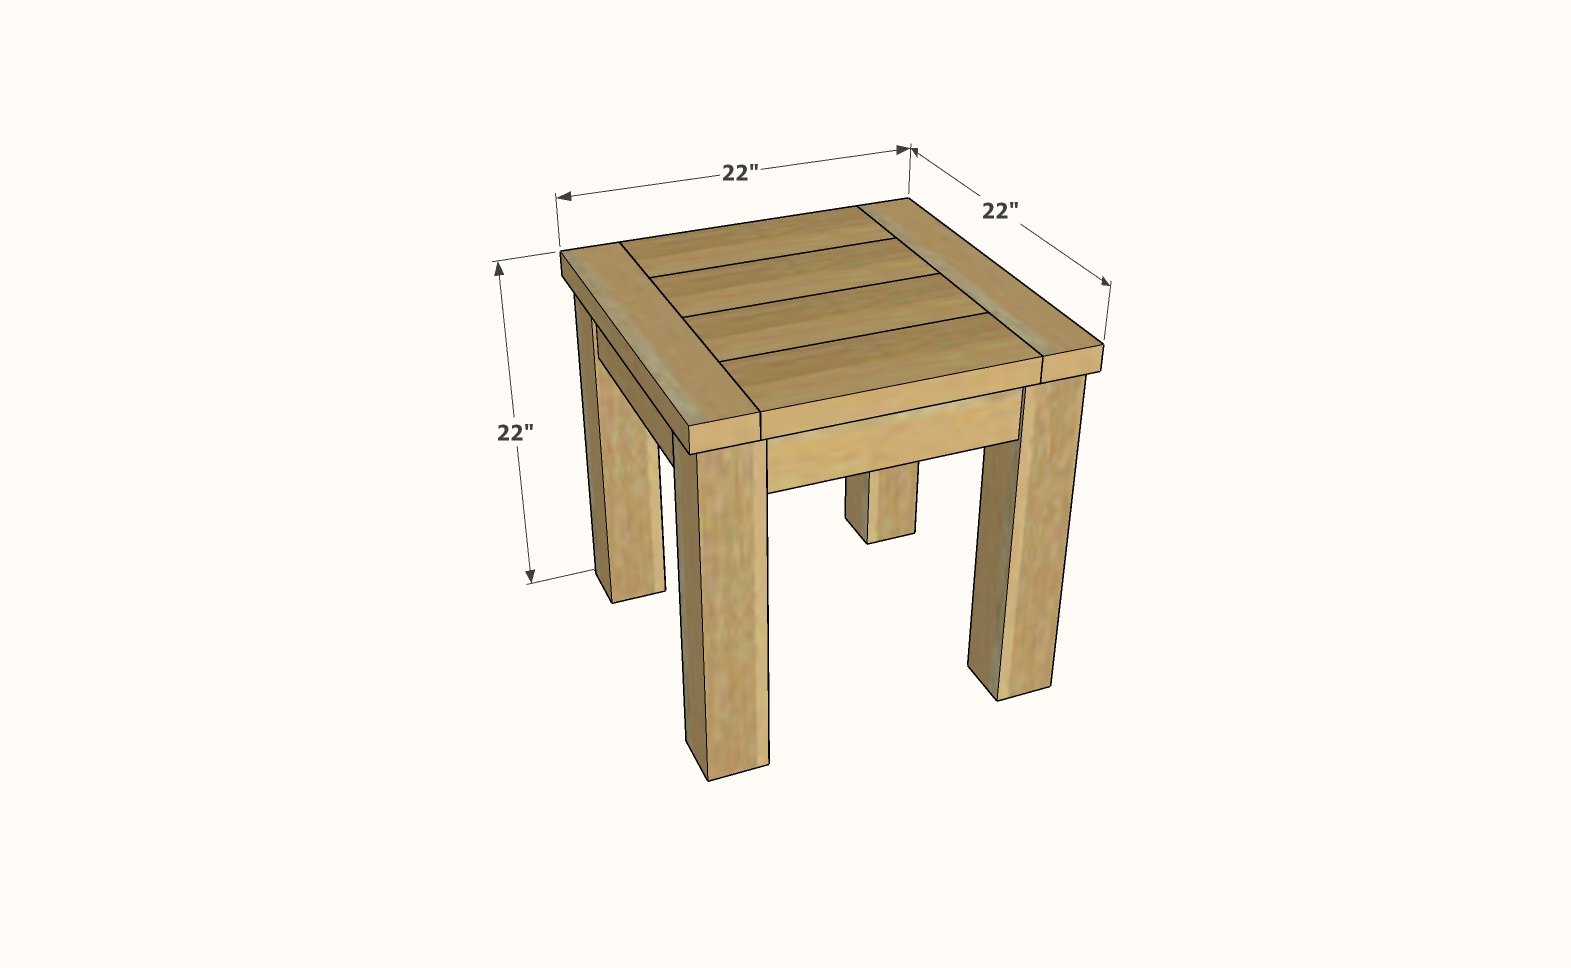 dimensions for end table